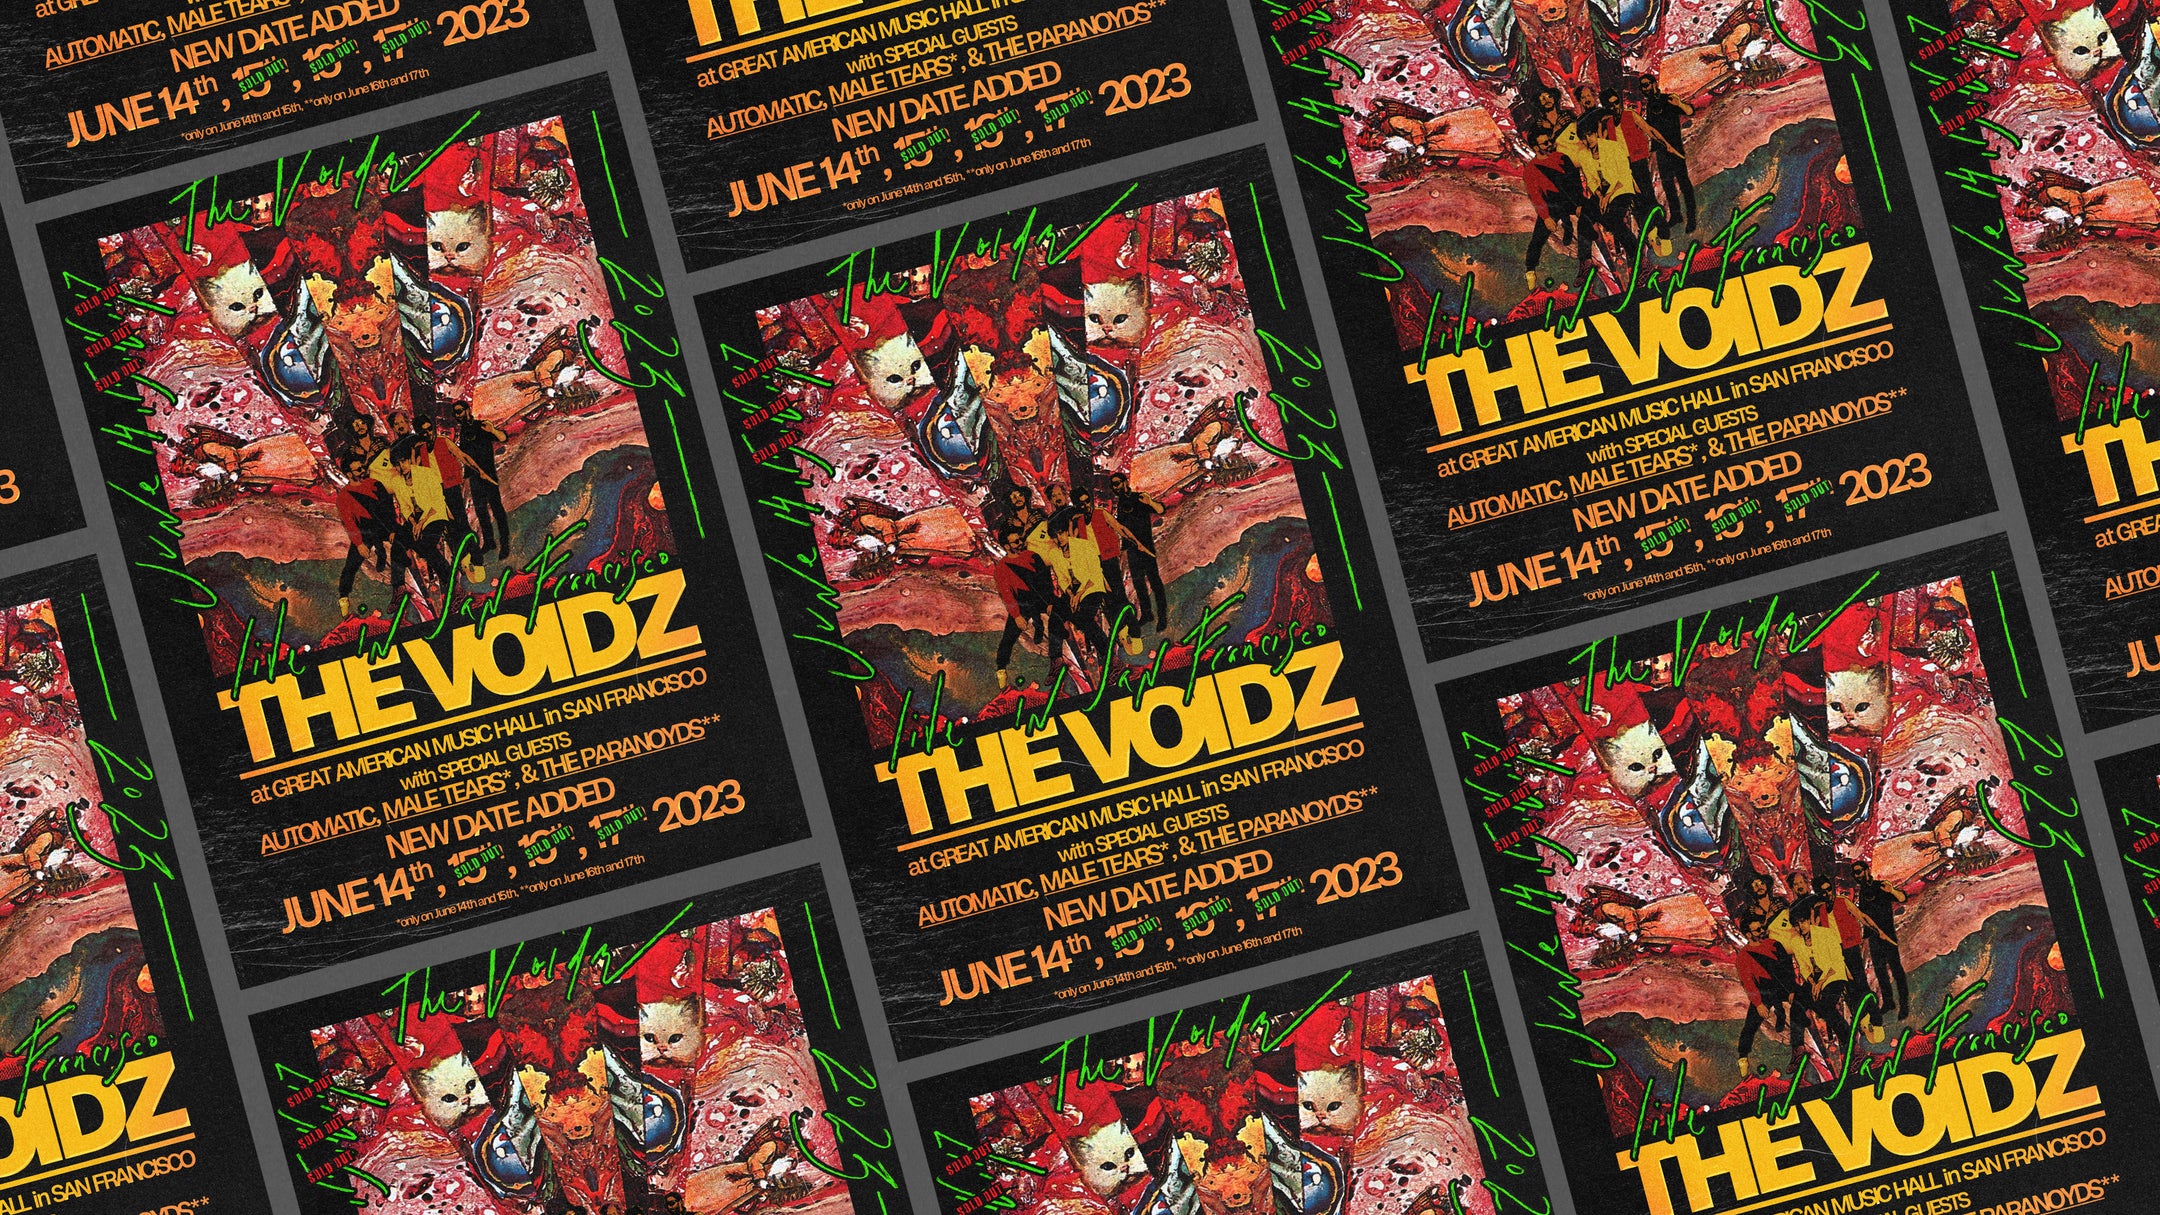 New Date Added to The Voidz's San Francisco Residency!